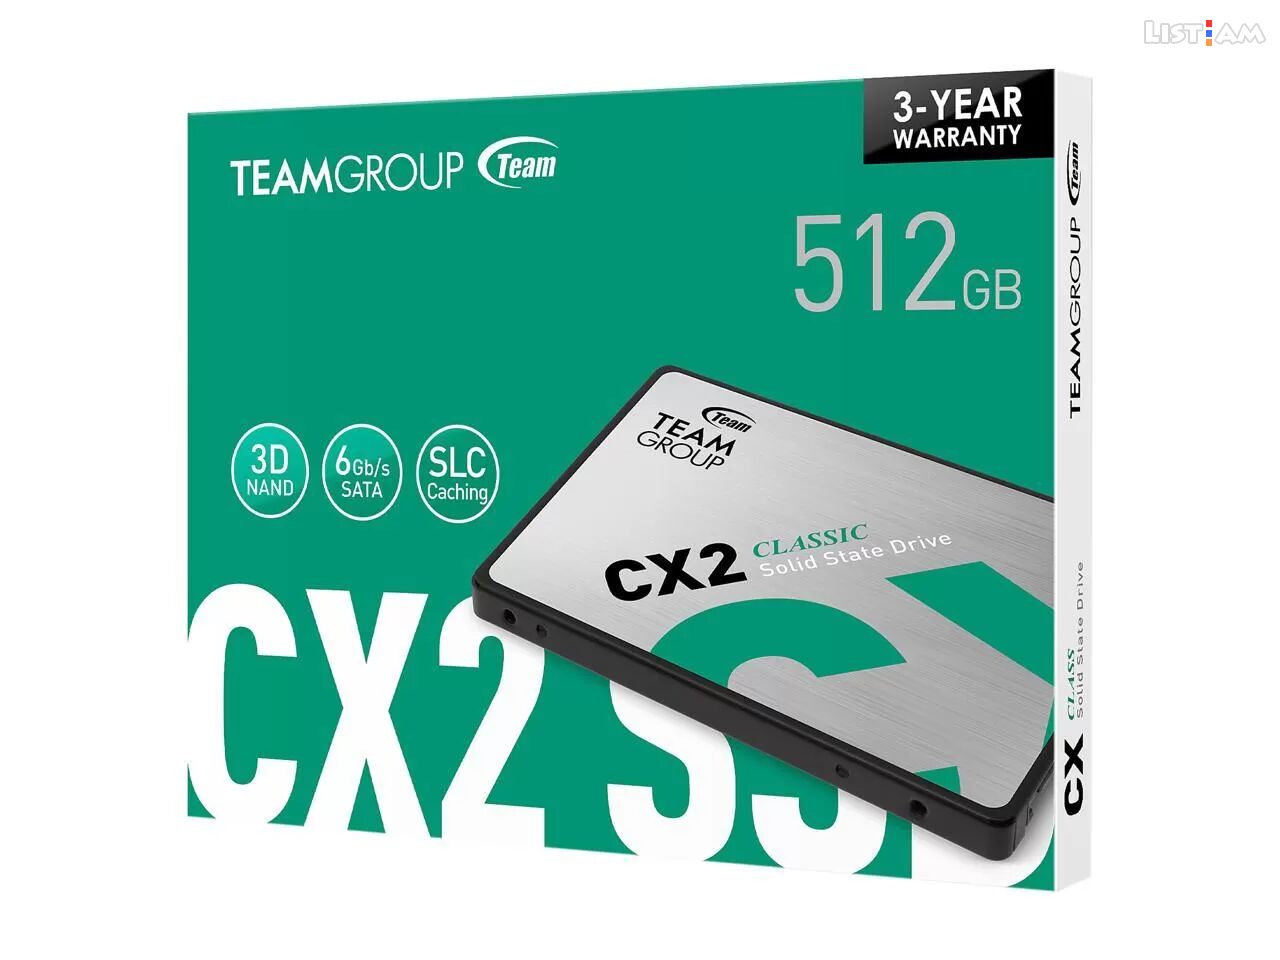 SSD 512gb TEAMGroup